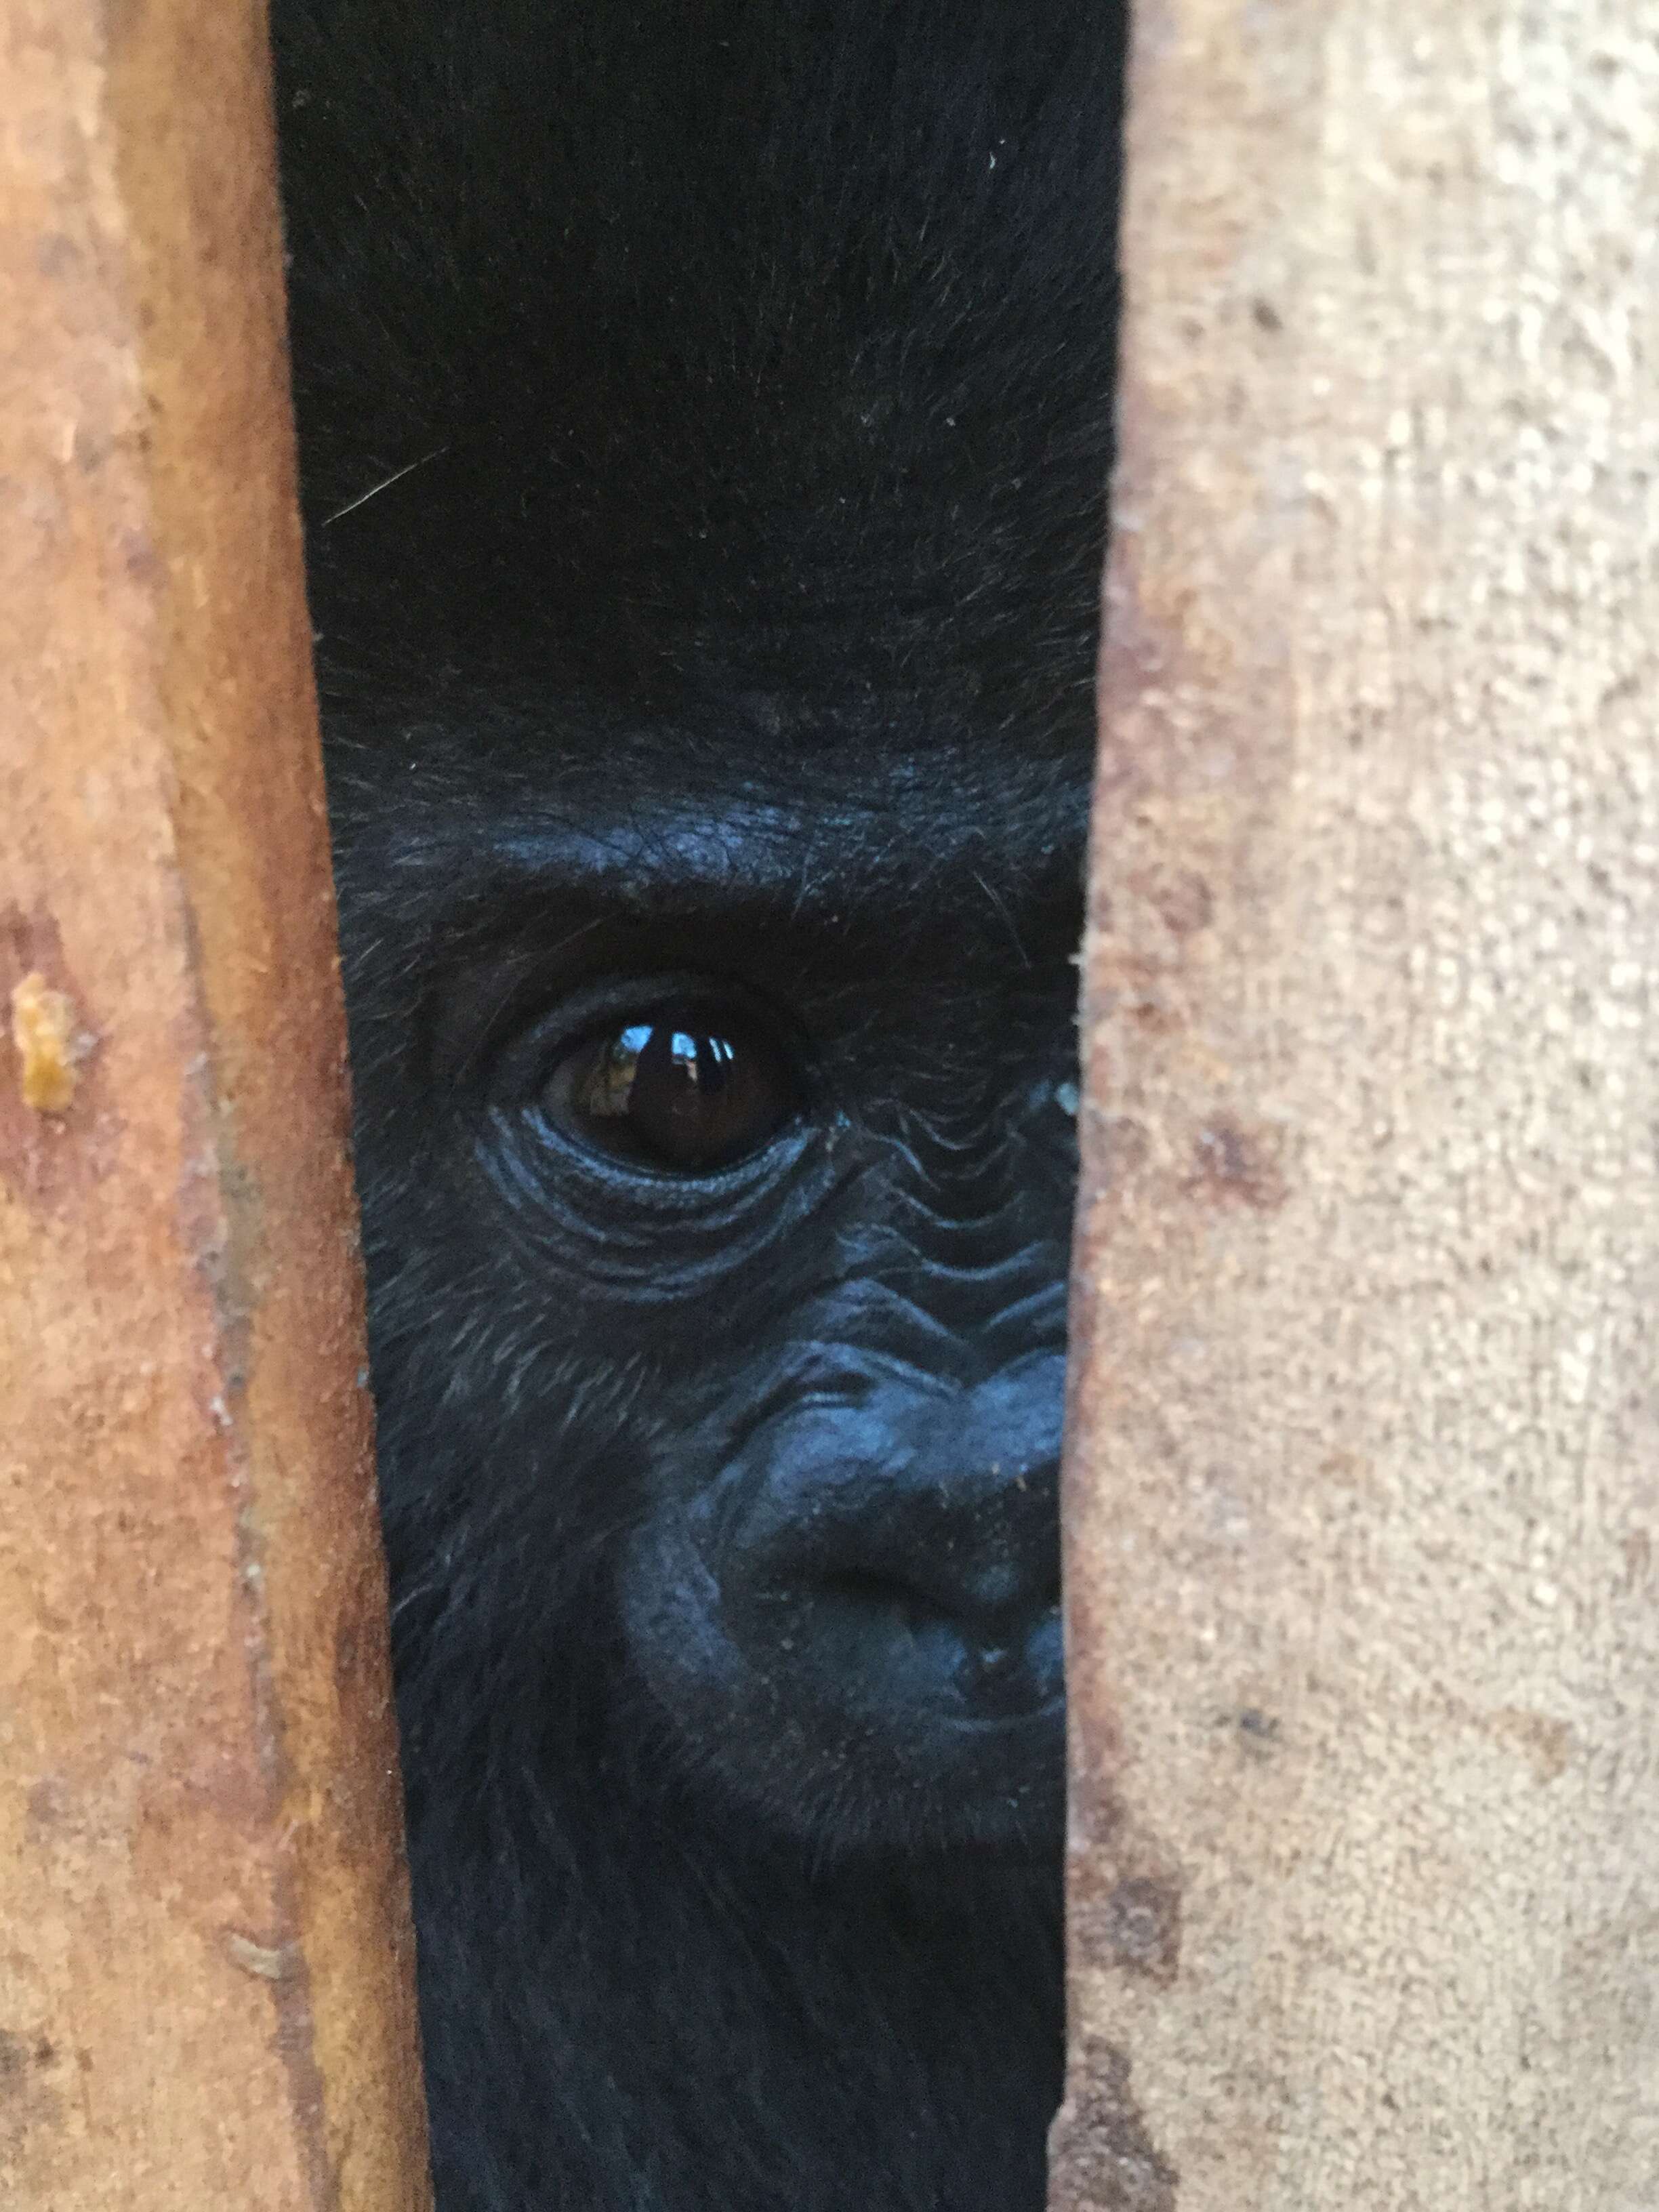 Baby gorilla orphaned by bushmeat trade saved in Cameroon